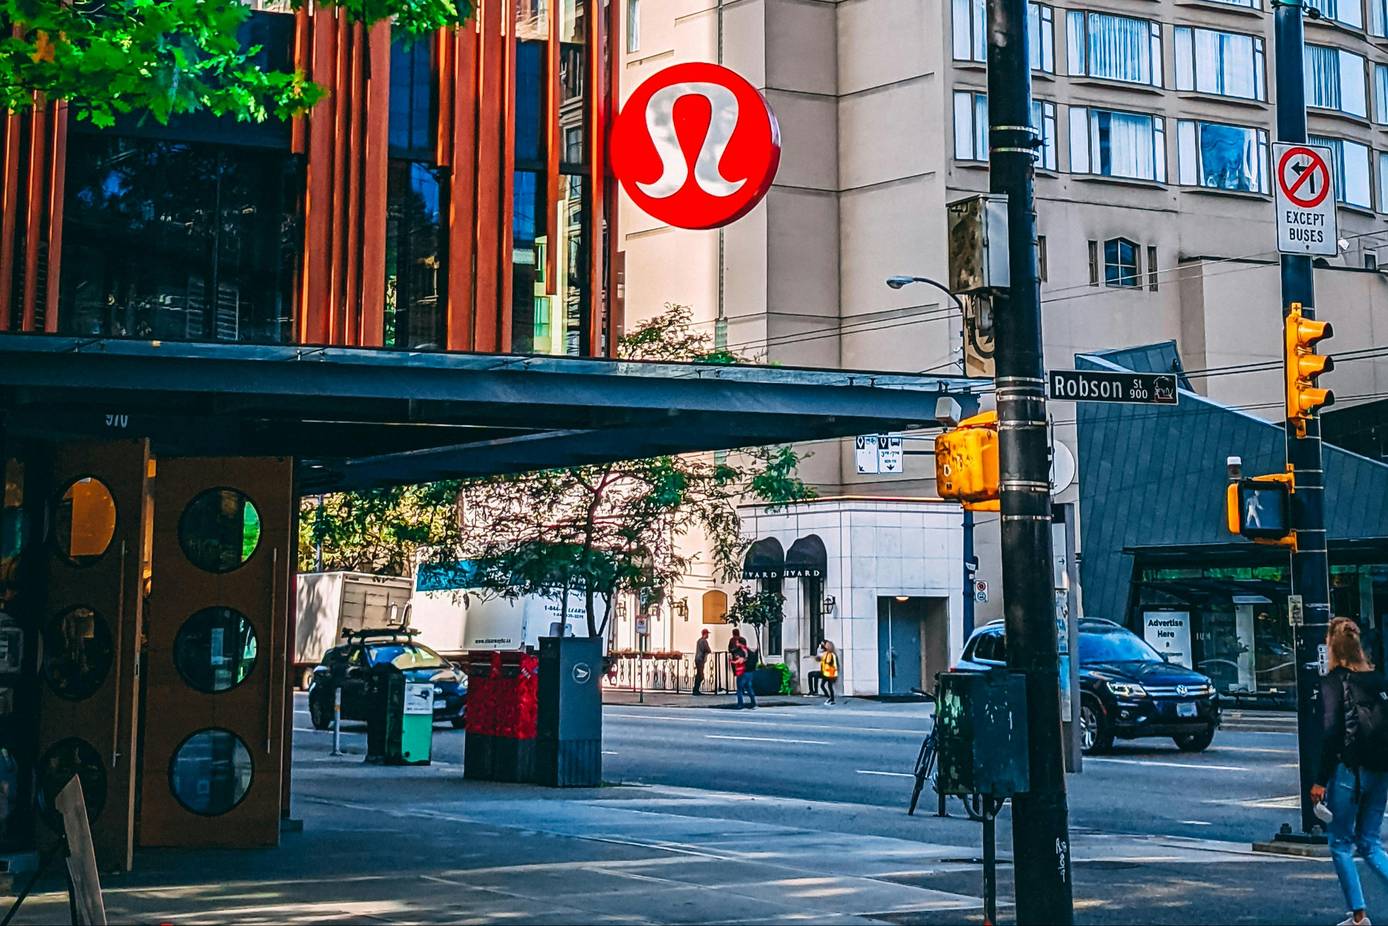 Lululemon faces allegations concerning 'unwelcoming company culture